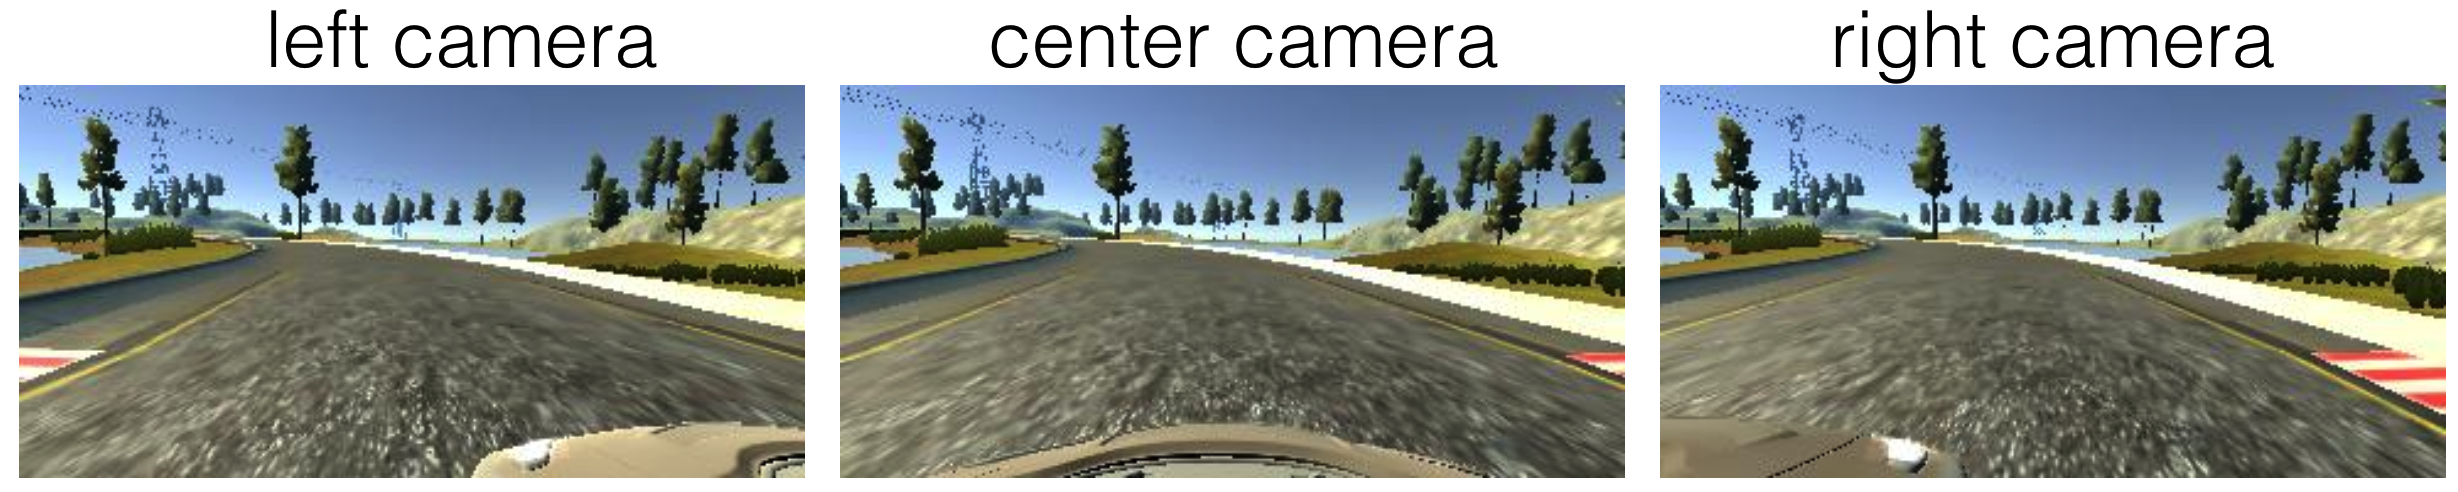 camera_images.png